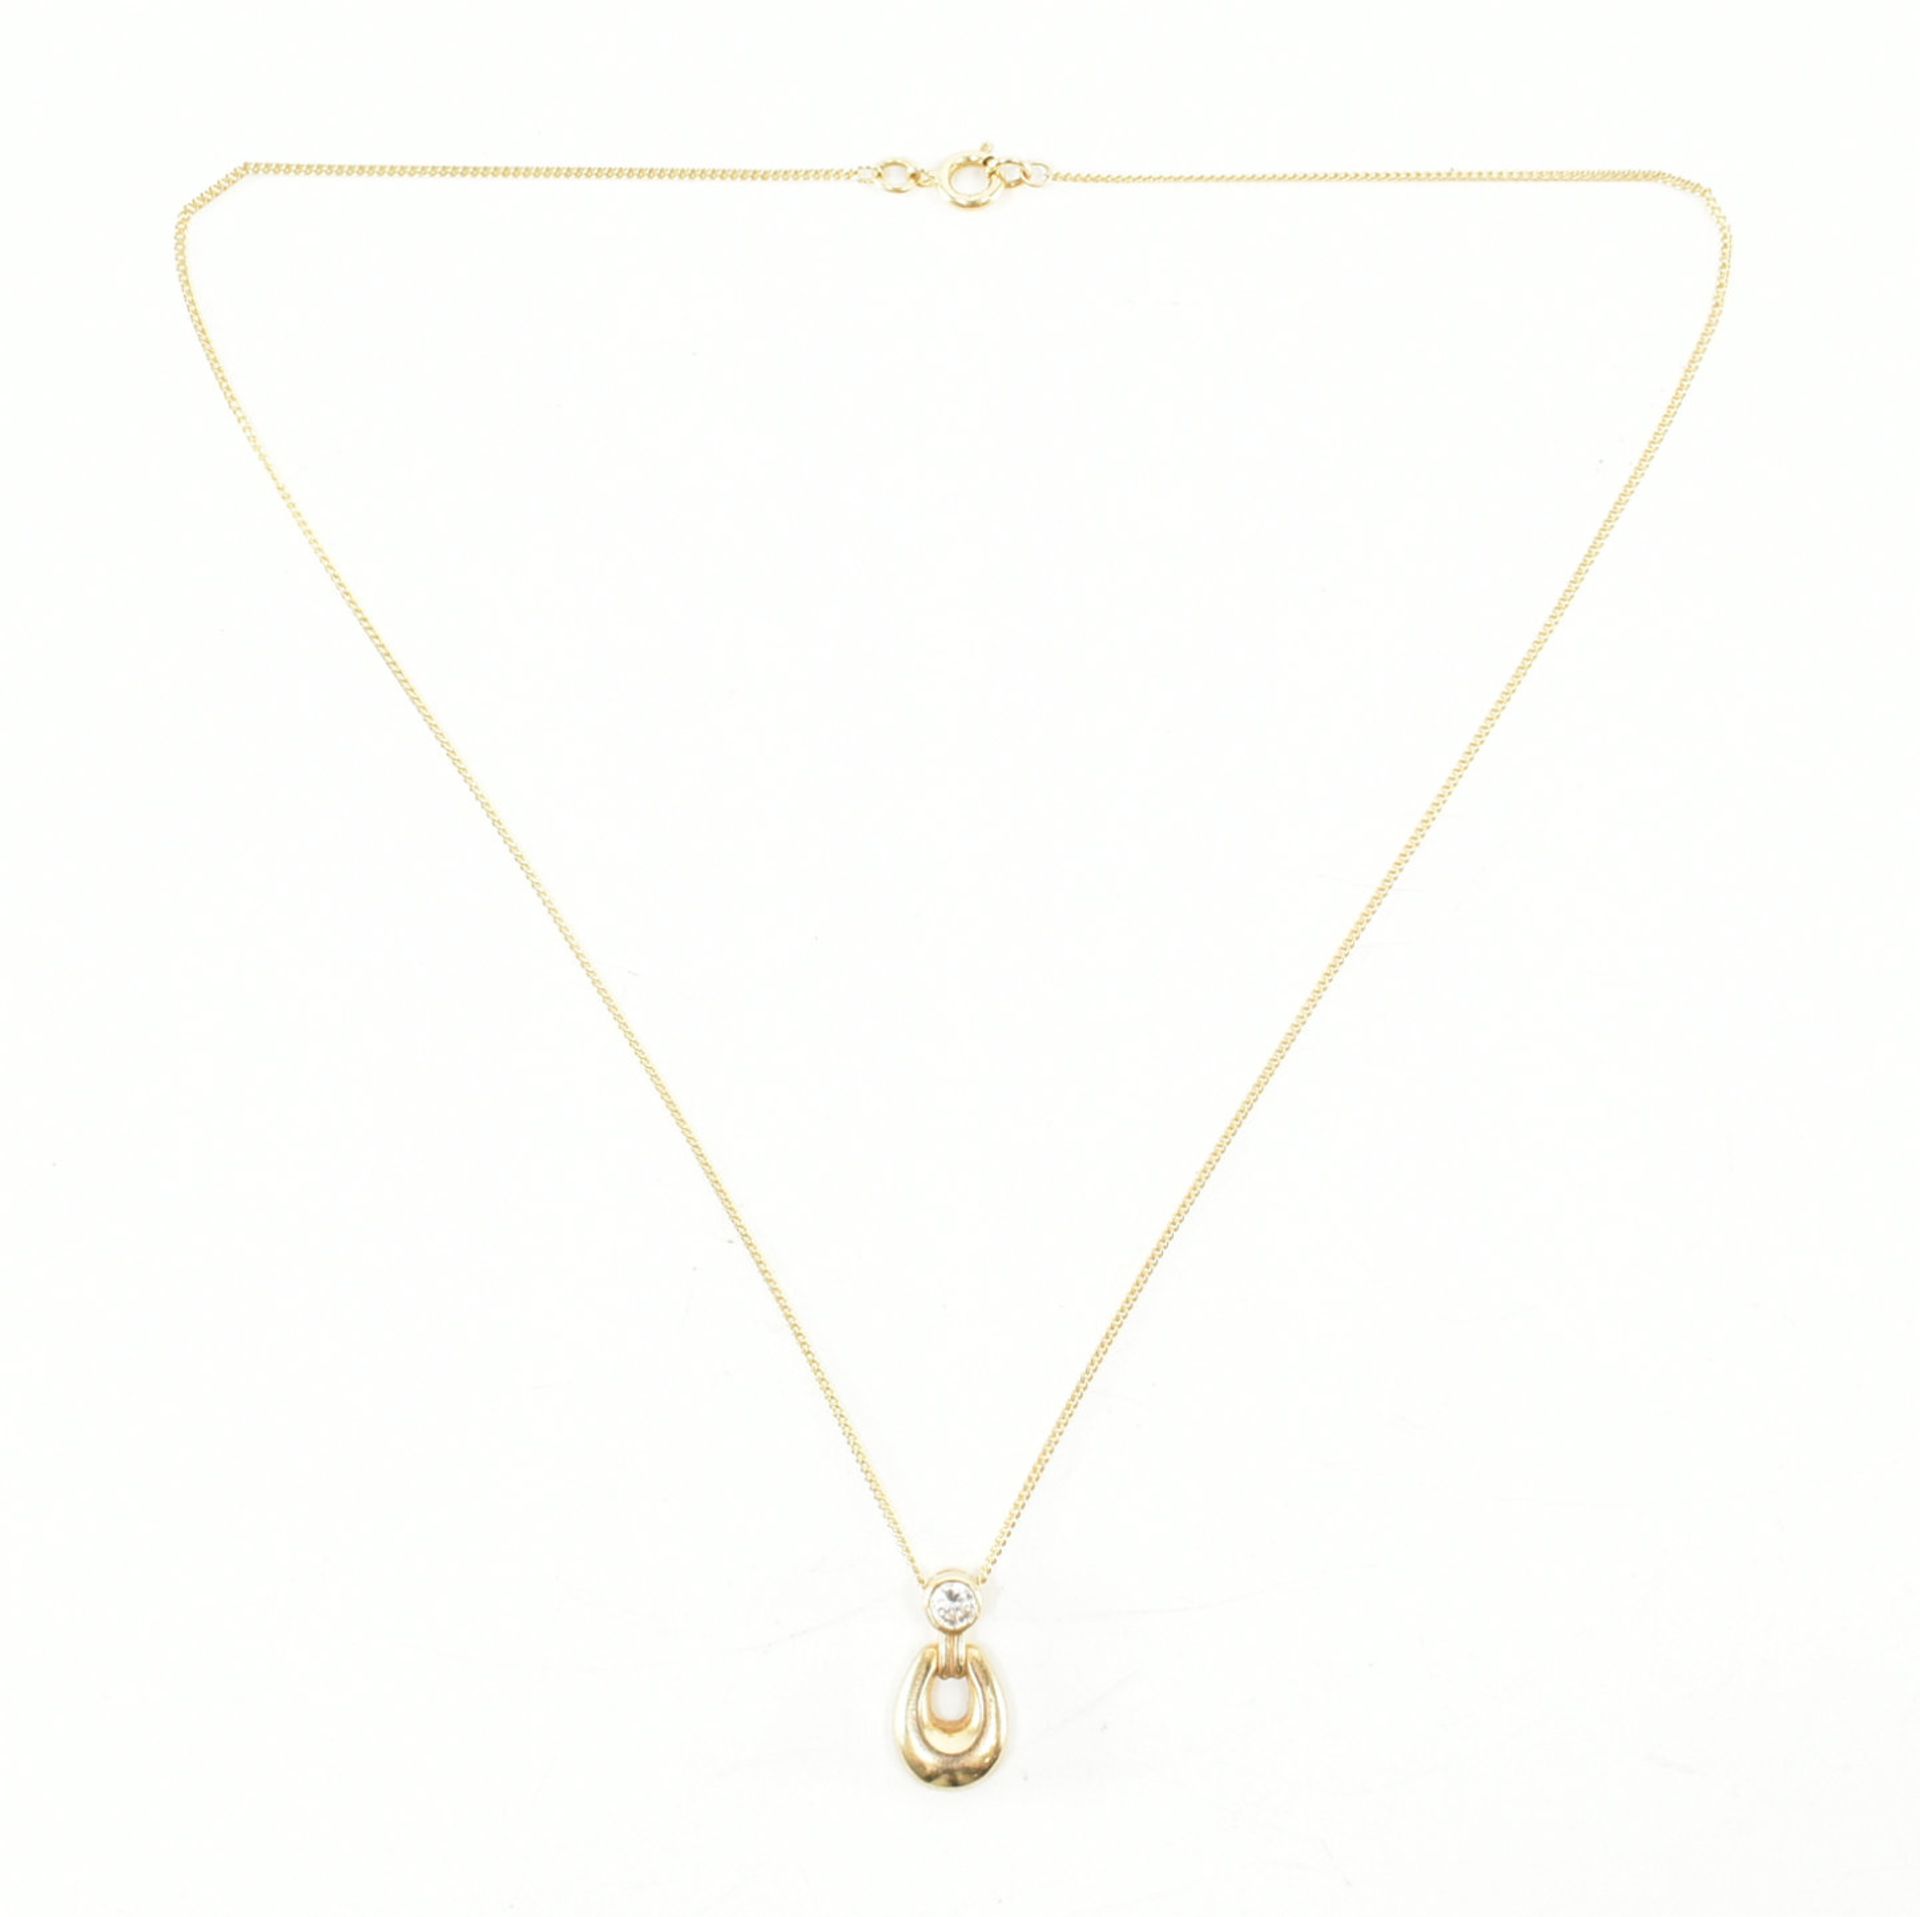 HALLMARKED 9CT GOLD & WHITE STONE NECKLACE PENDANT ON CHAIN - Image 3 of 8